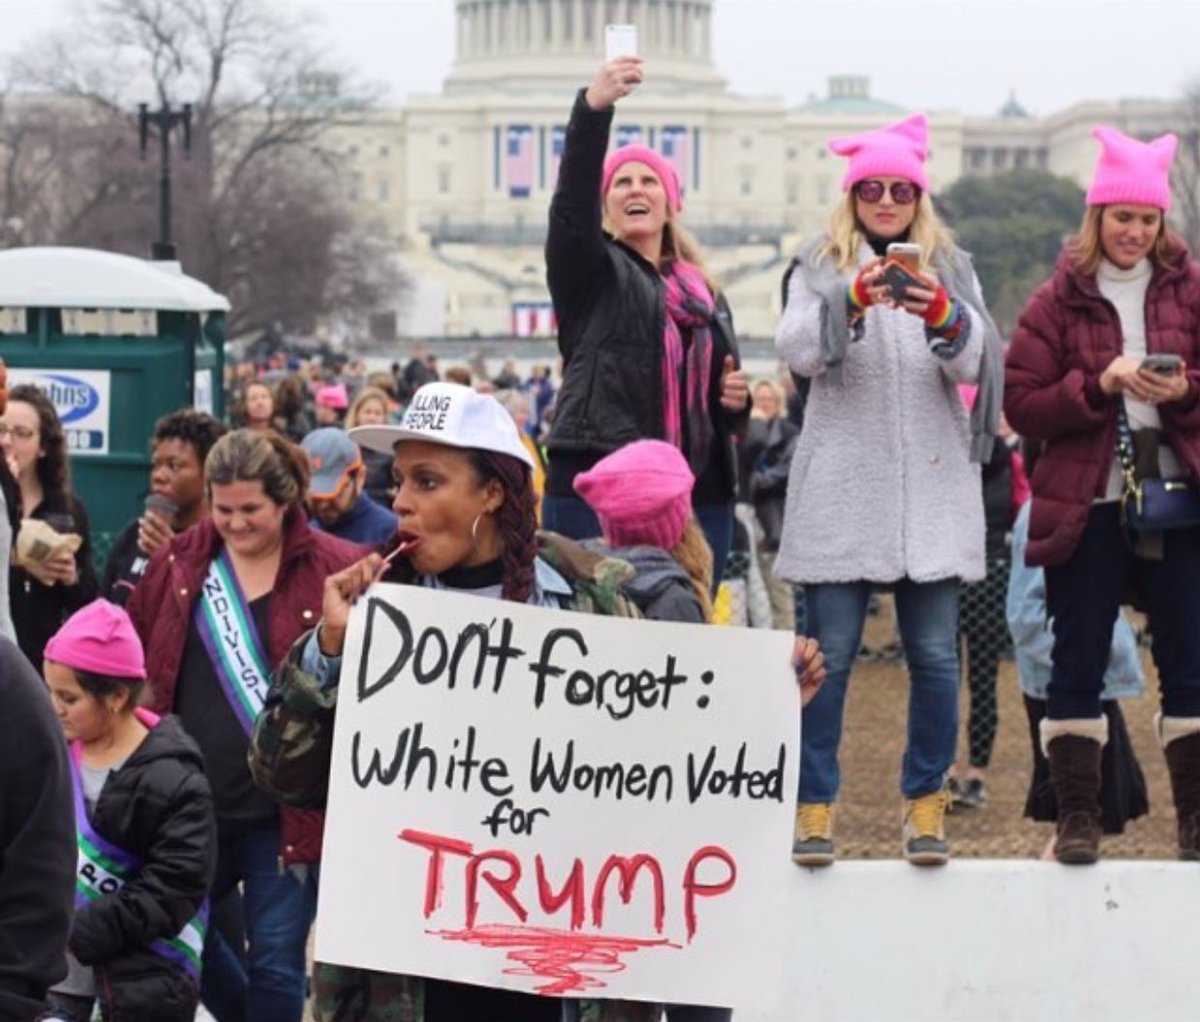 Some Inconvenient Truths About The Women’s March On Washington (GOOD)